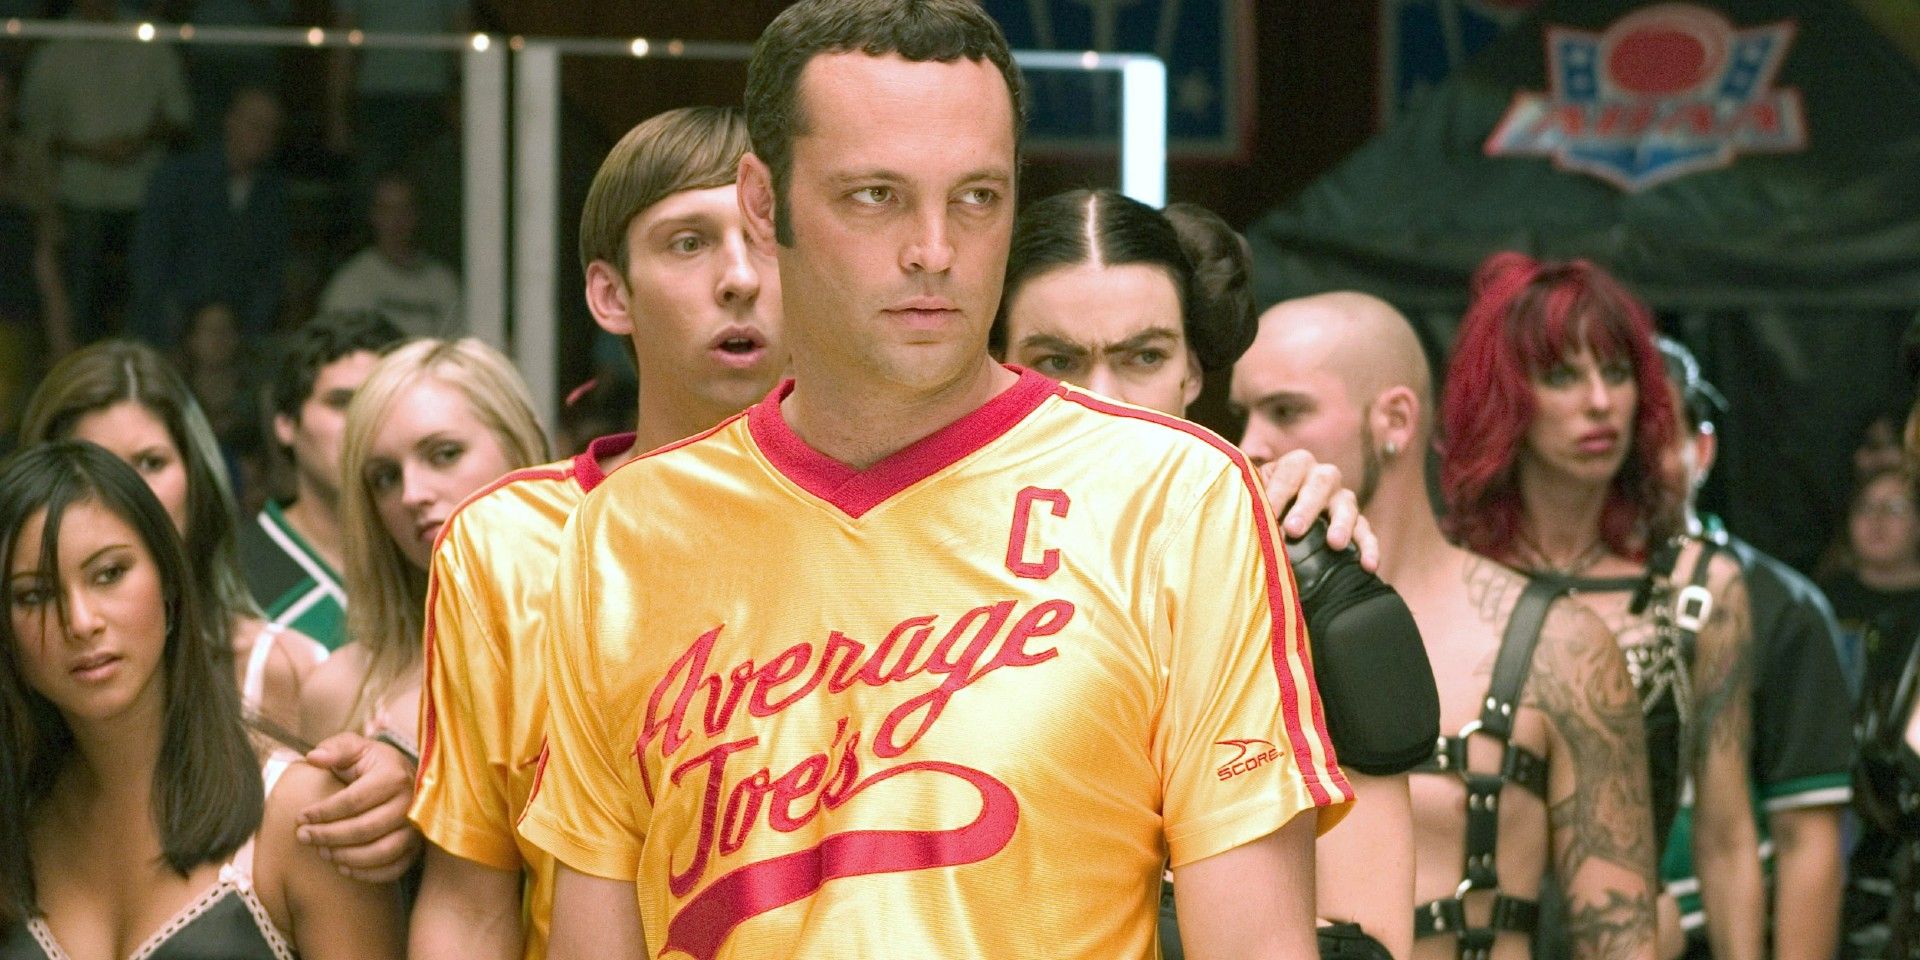 Vince Vaughn in a competition in Dodgeball